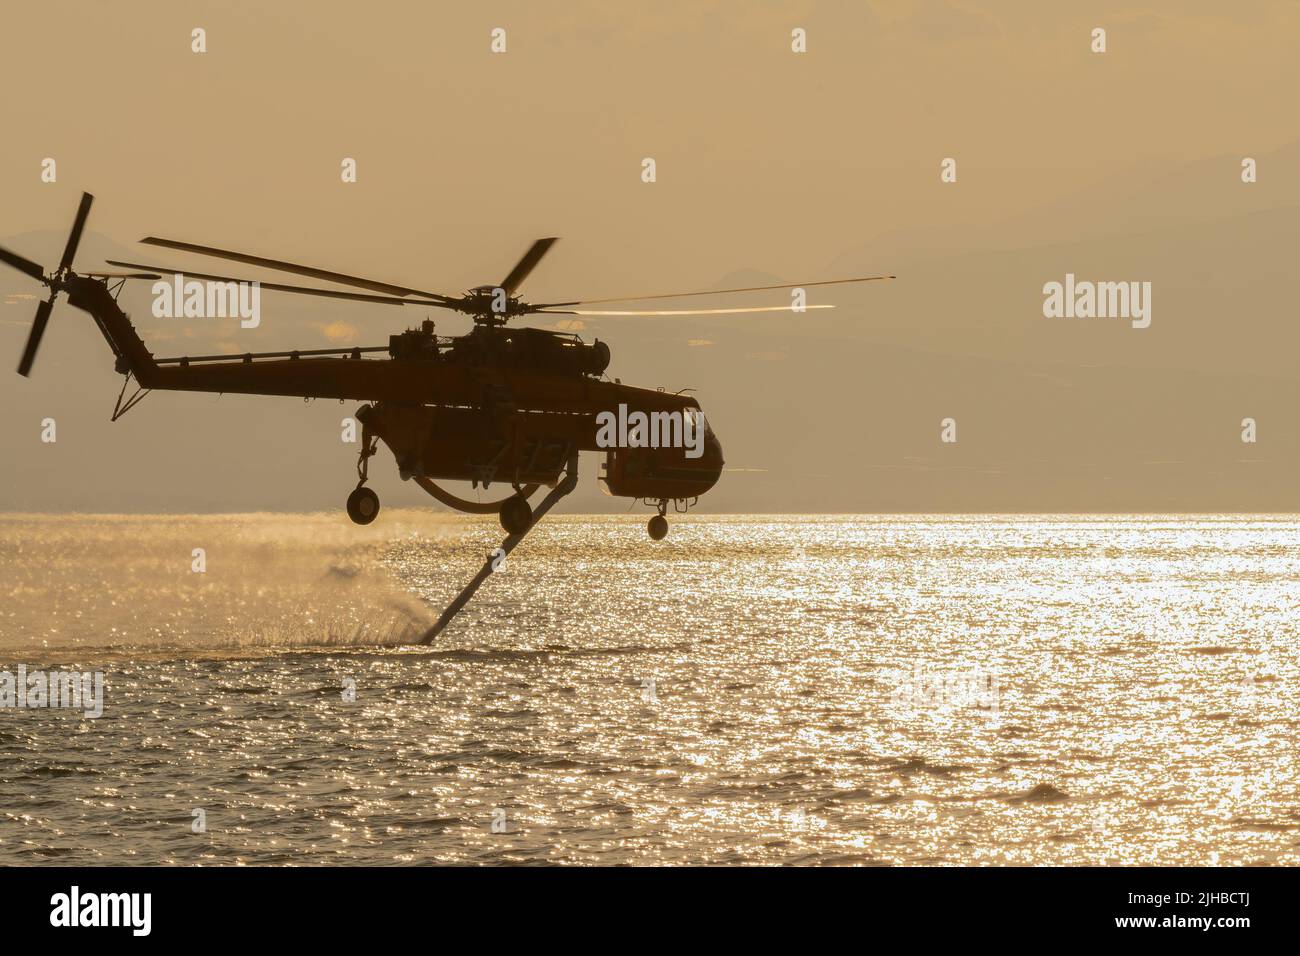 Loutraki, Greece 14 September 2019. Fire helicopter at Loutraki in Greece for the big fire gathering water. Close up view. Stock Photo